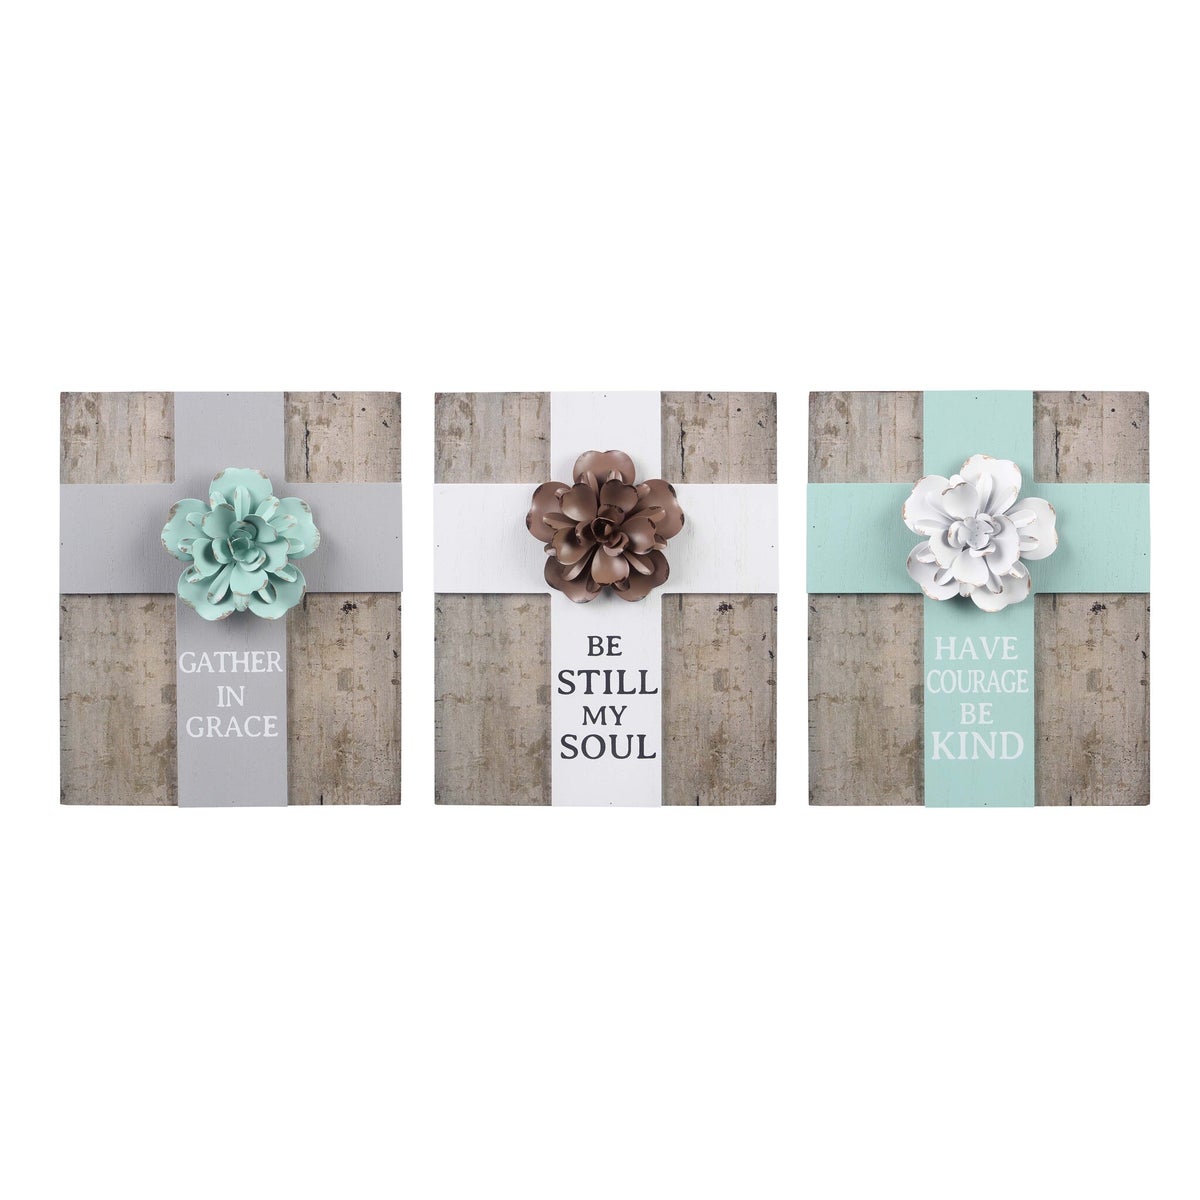 Wood Box Tabletop/Wall Sign with 3D Cross and Metal Flower Design, 3 Assorted